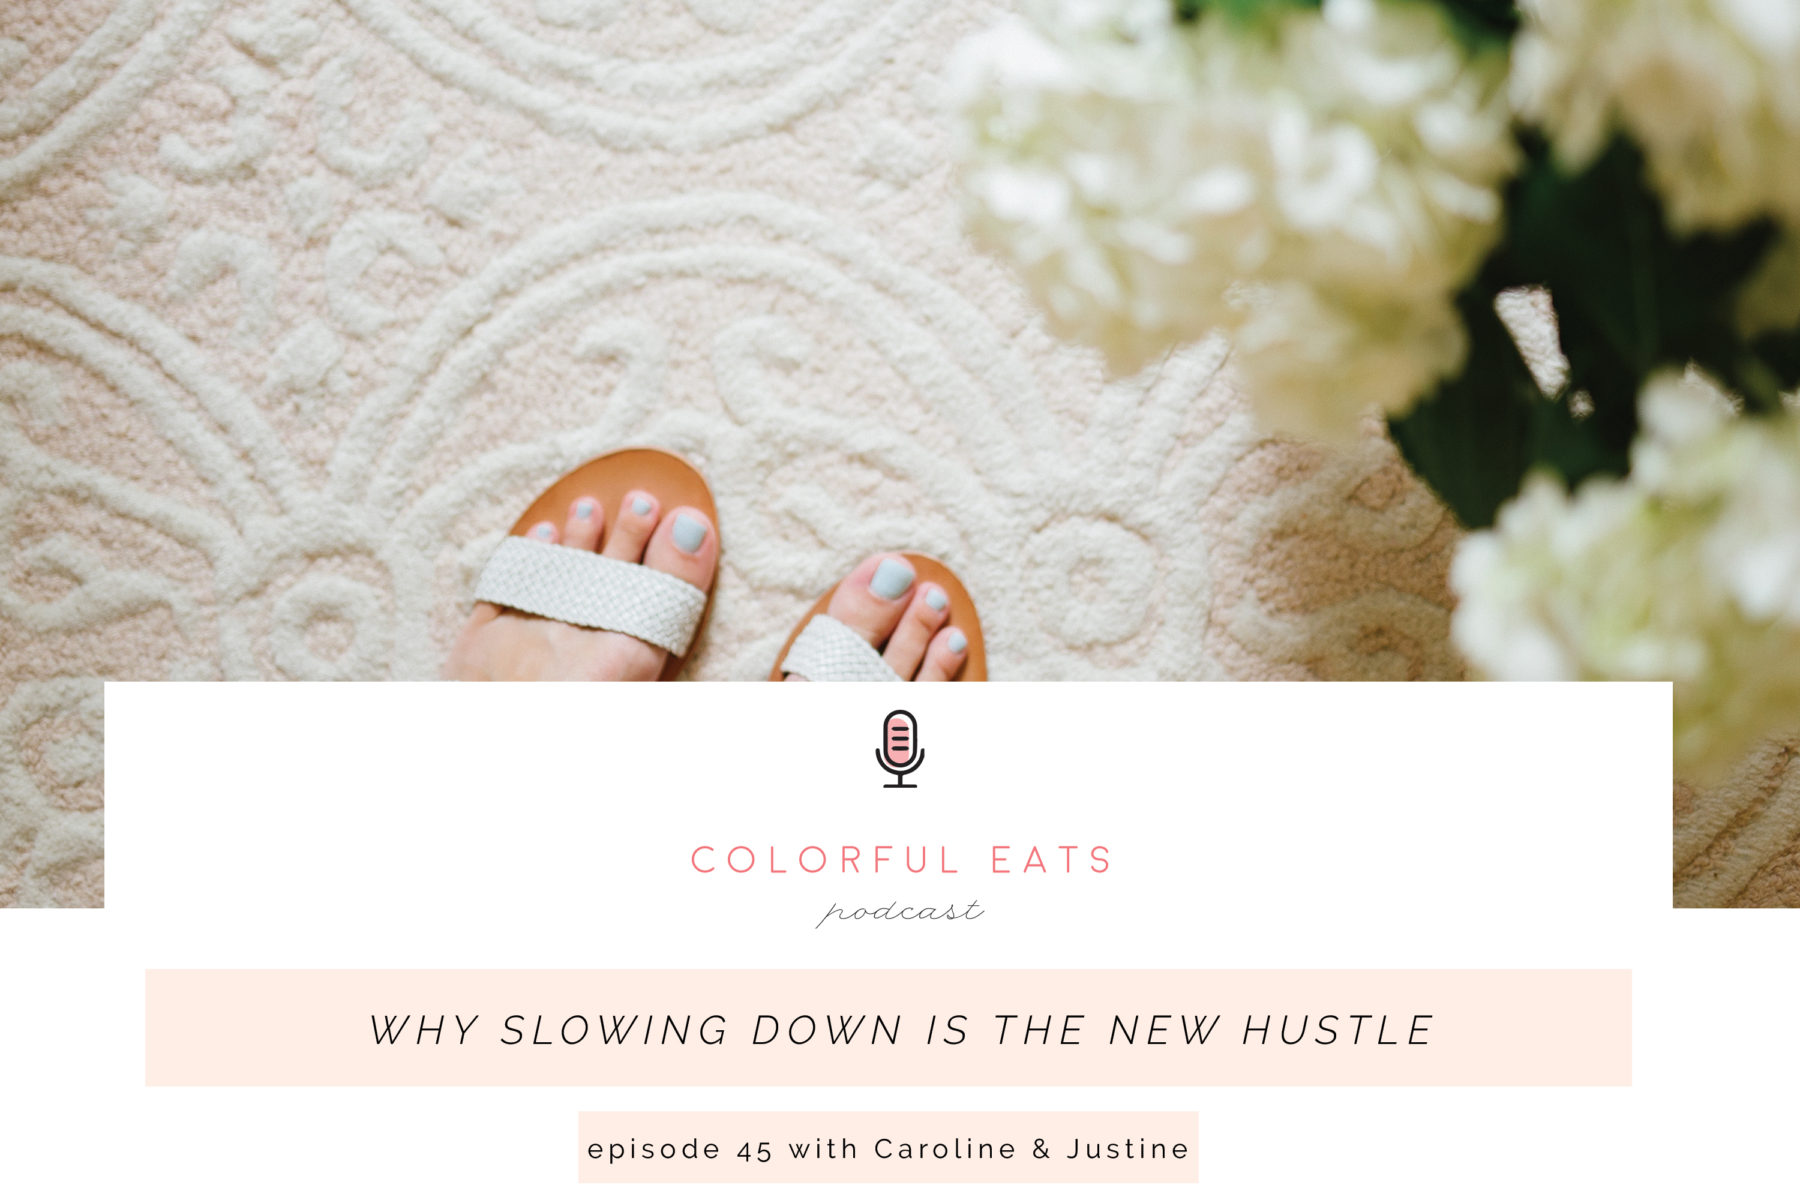 Colorful Eats Podcast Episode 45: Why Slowing Down is the New Hustle